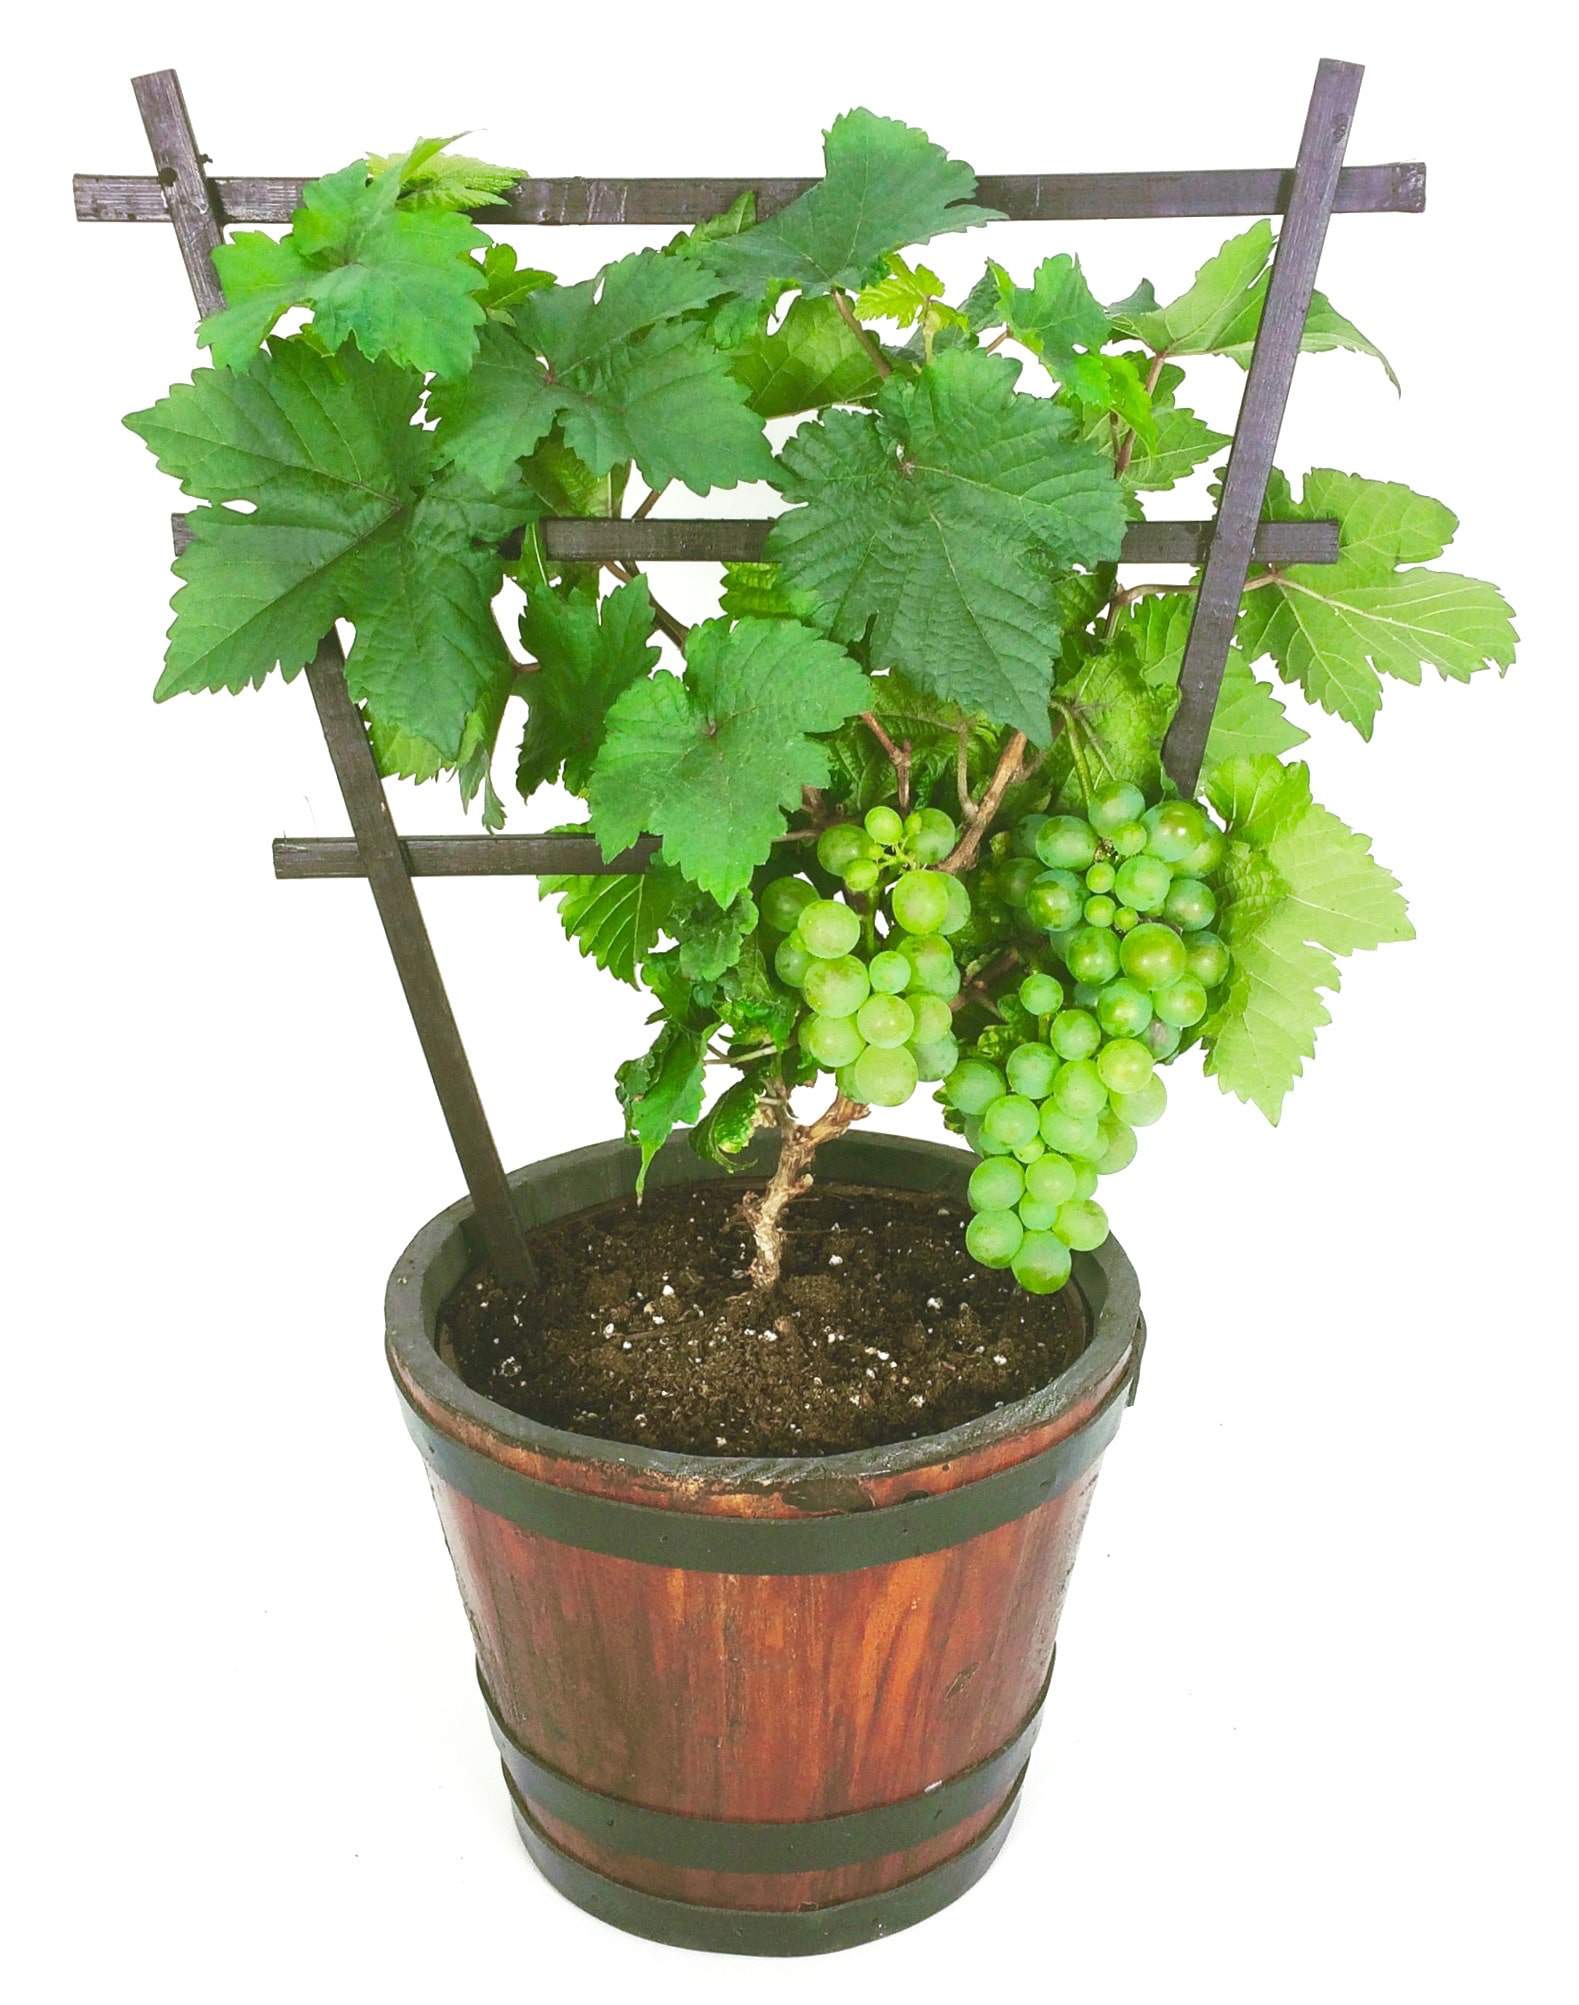 Pixie grapevine is tiny enough for a tabletop display. (Photo courtesy of Vineland Research and Innovation)